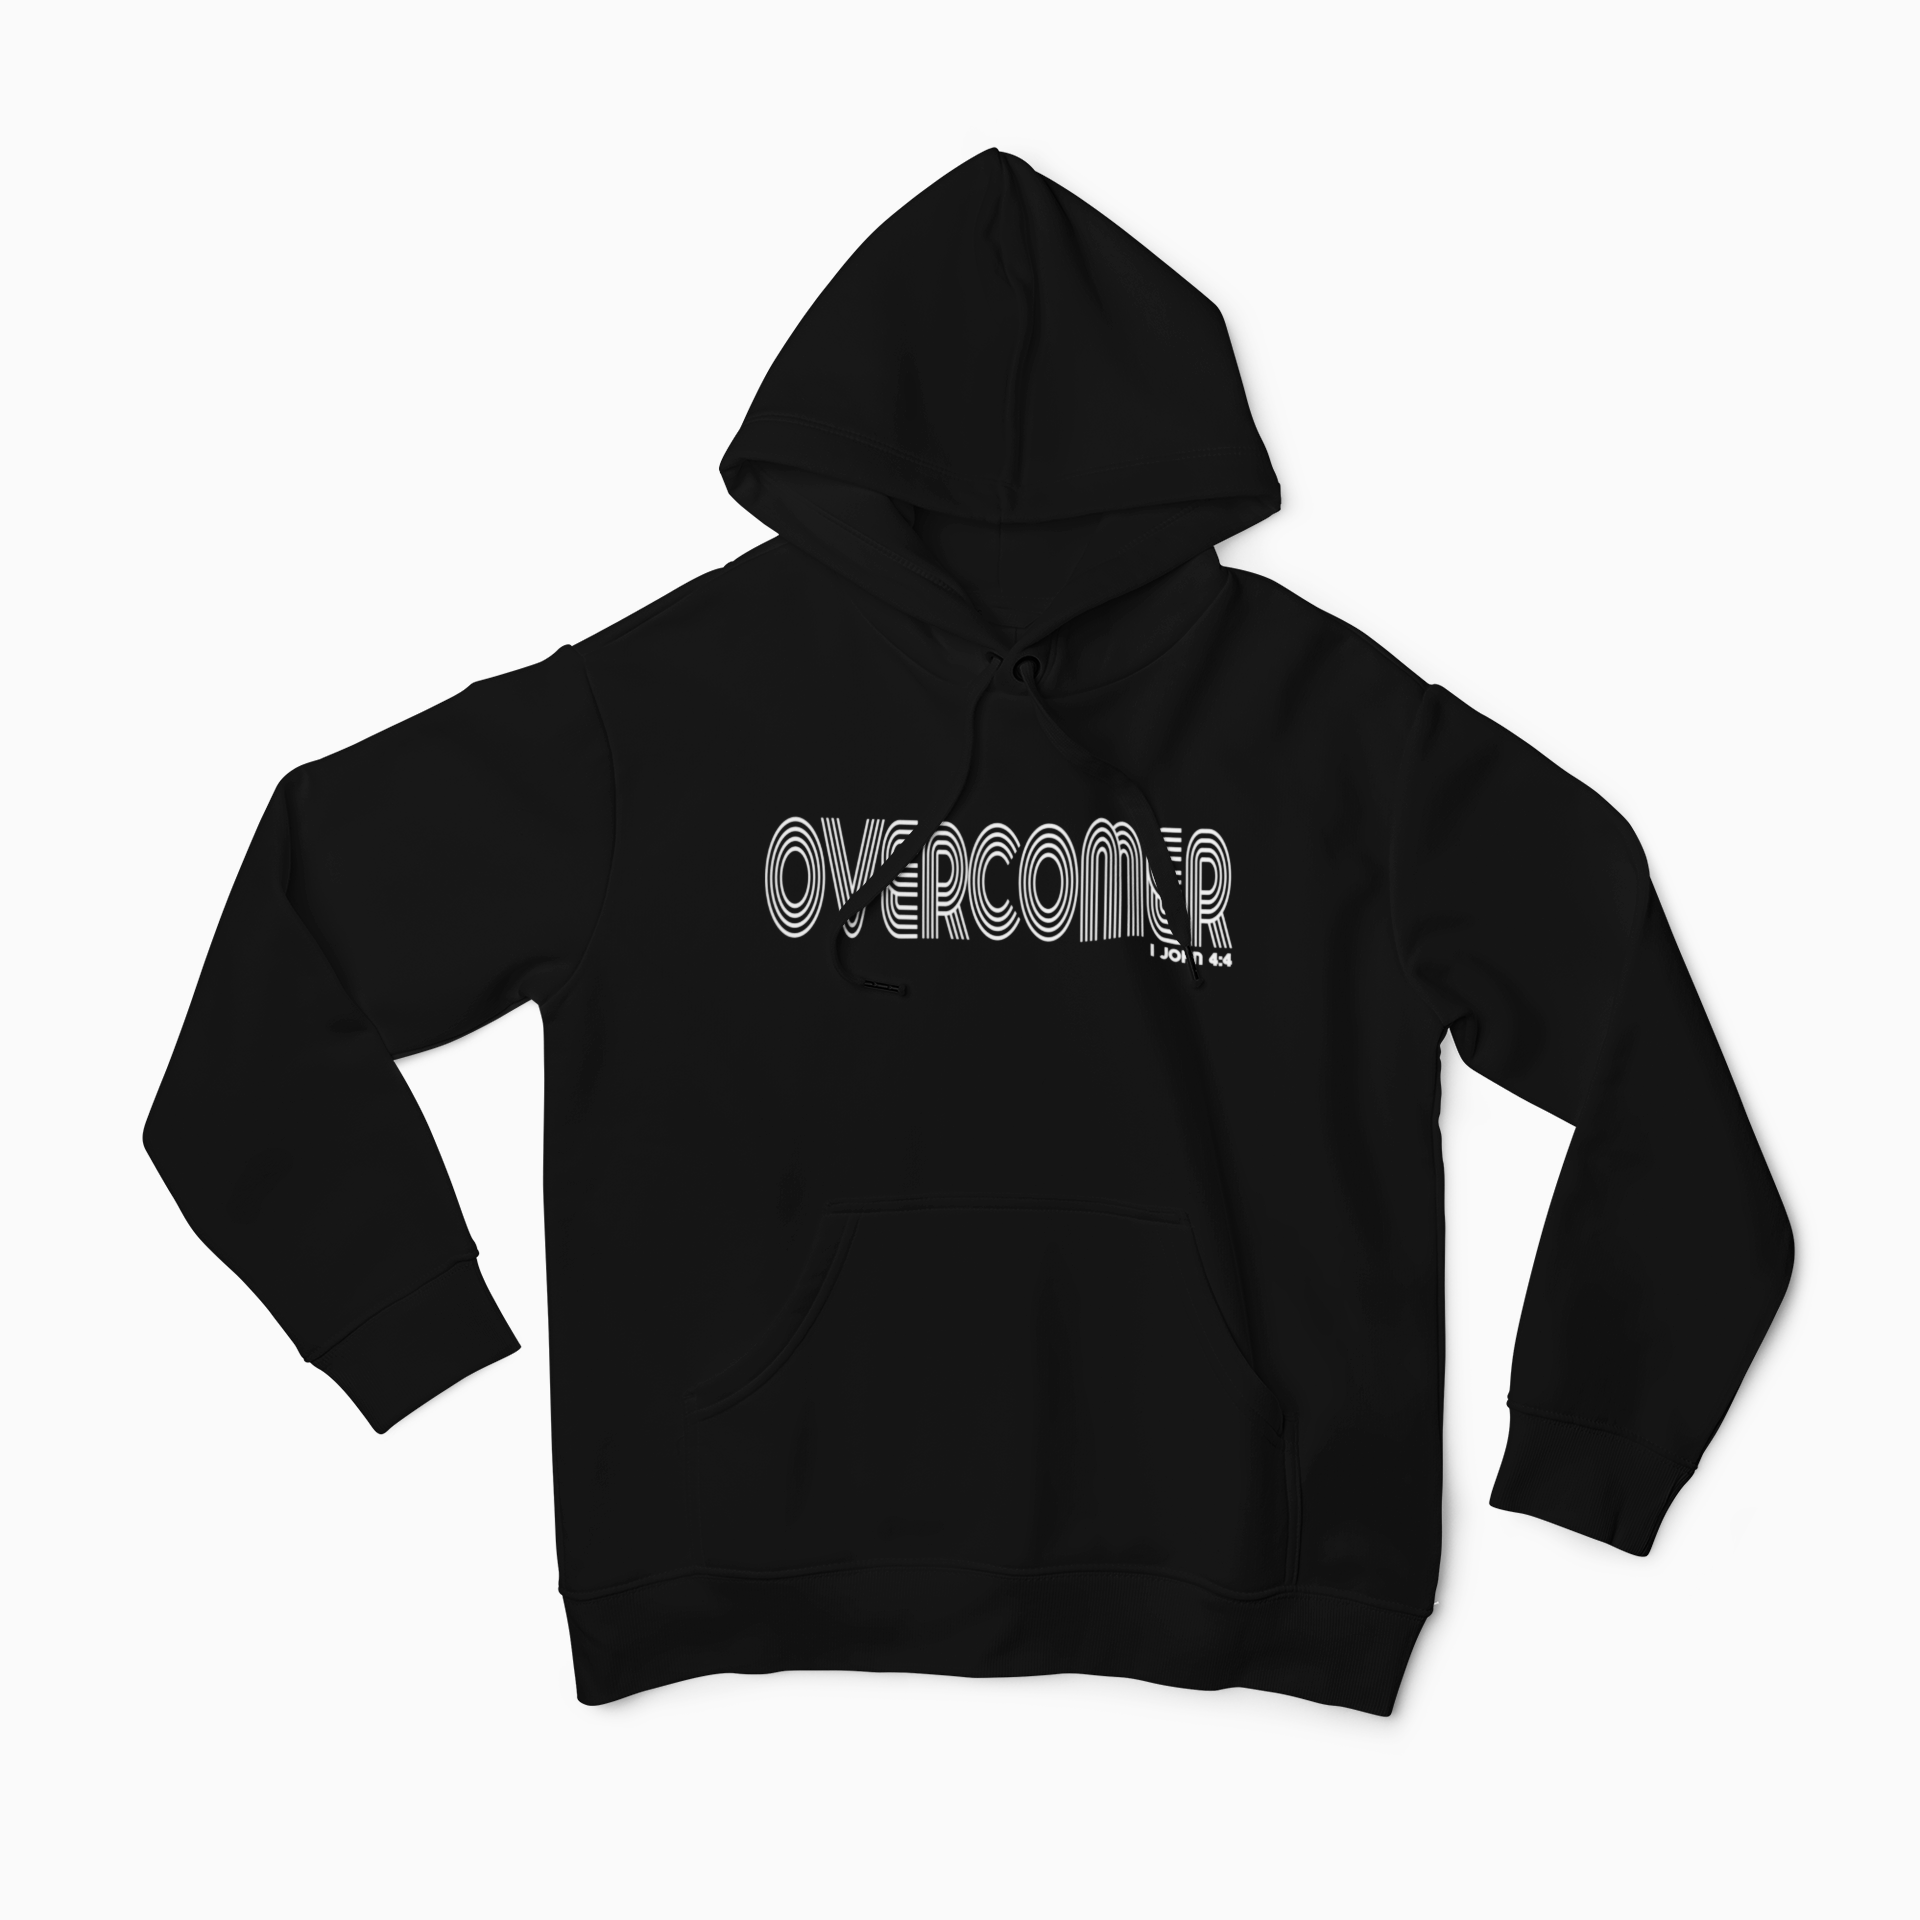 Shop for our Overcomer Graphic Christian Statement Hoodie. This Christian hoodie is black and unisex. The comfortable style and feel will allow you to wear it everyday. This statement hoodie allows you to show your faith. The message of this hoodie tells everyone you are strong enough to get through anything with Christ.